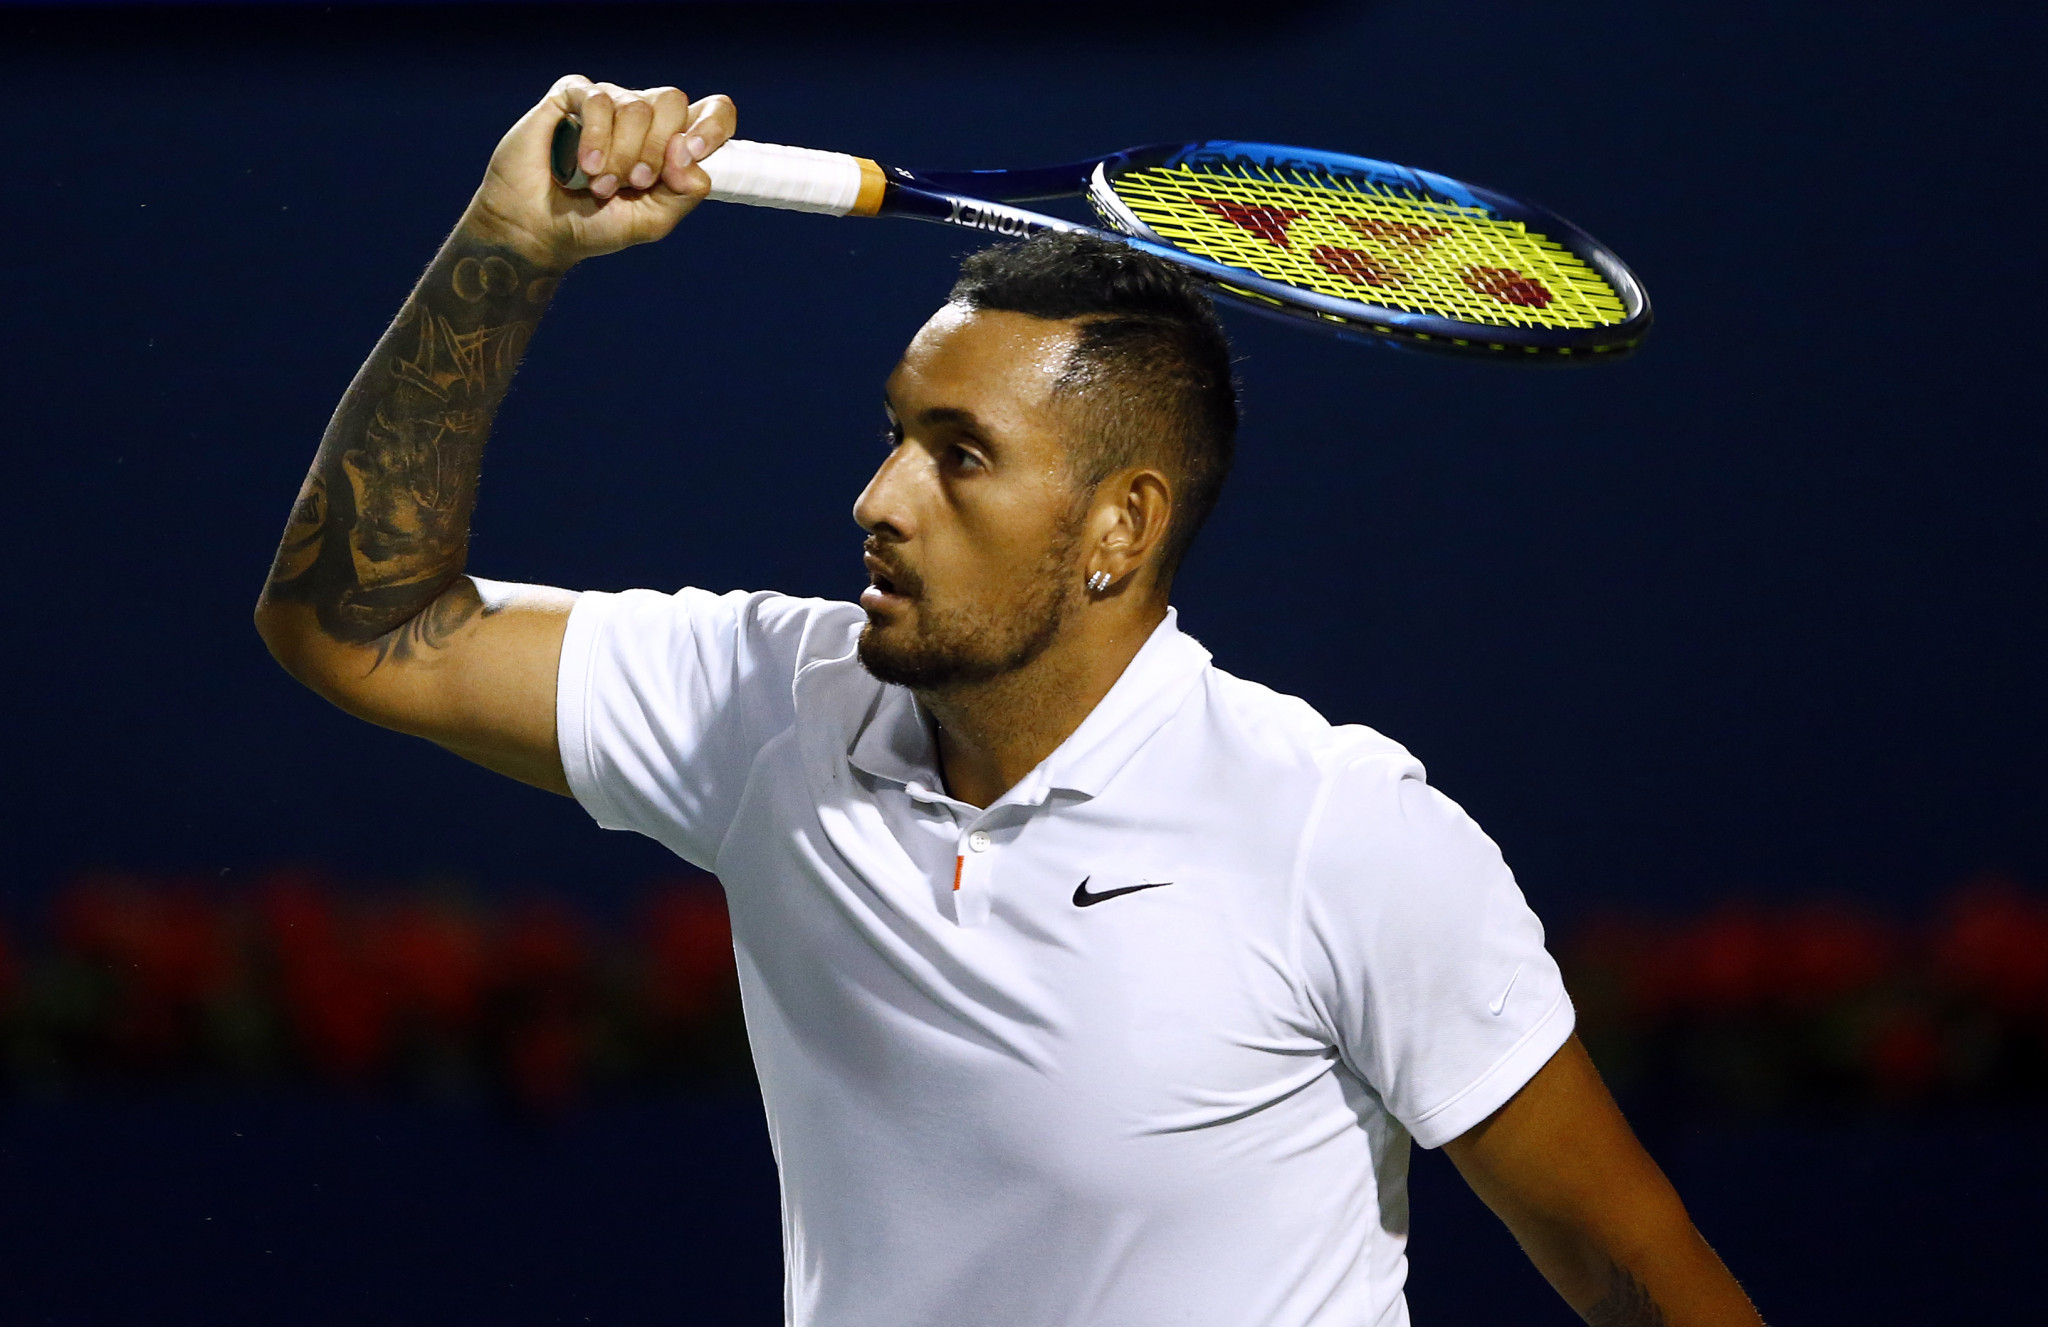 Kyrgios dumped out of Canadian Open in round of 64